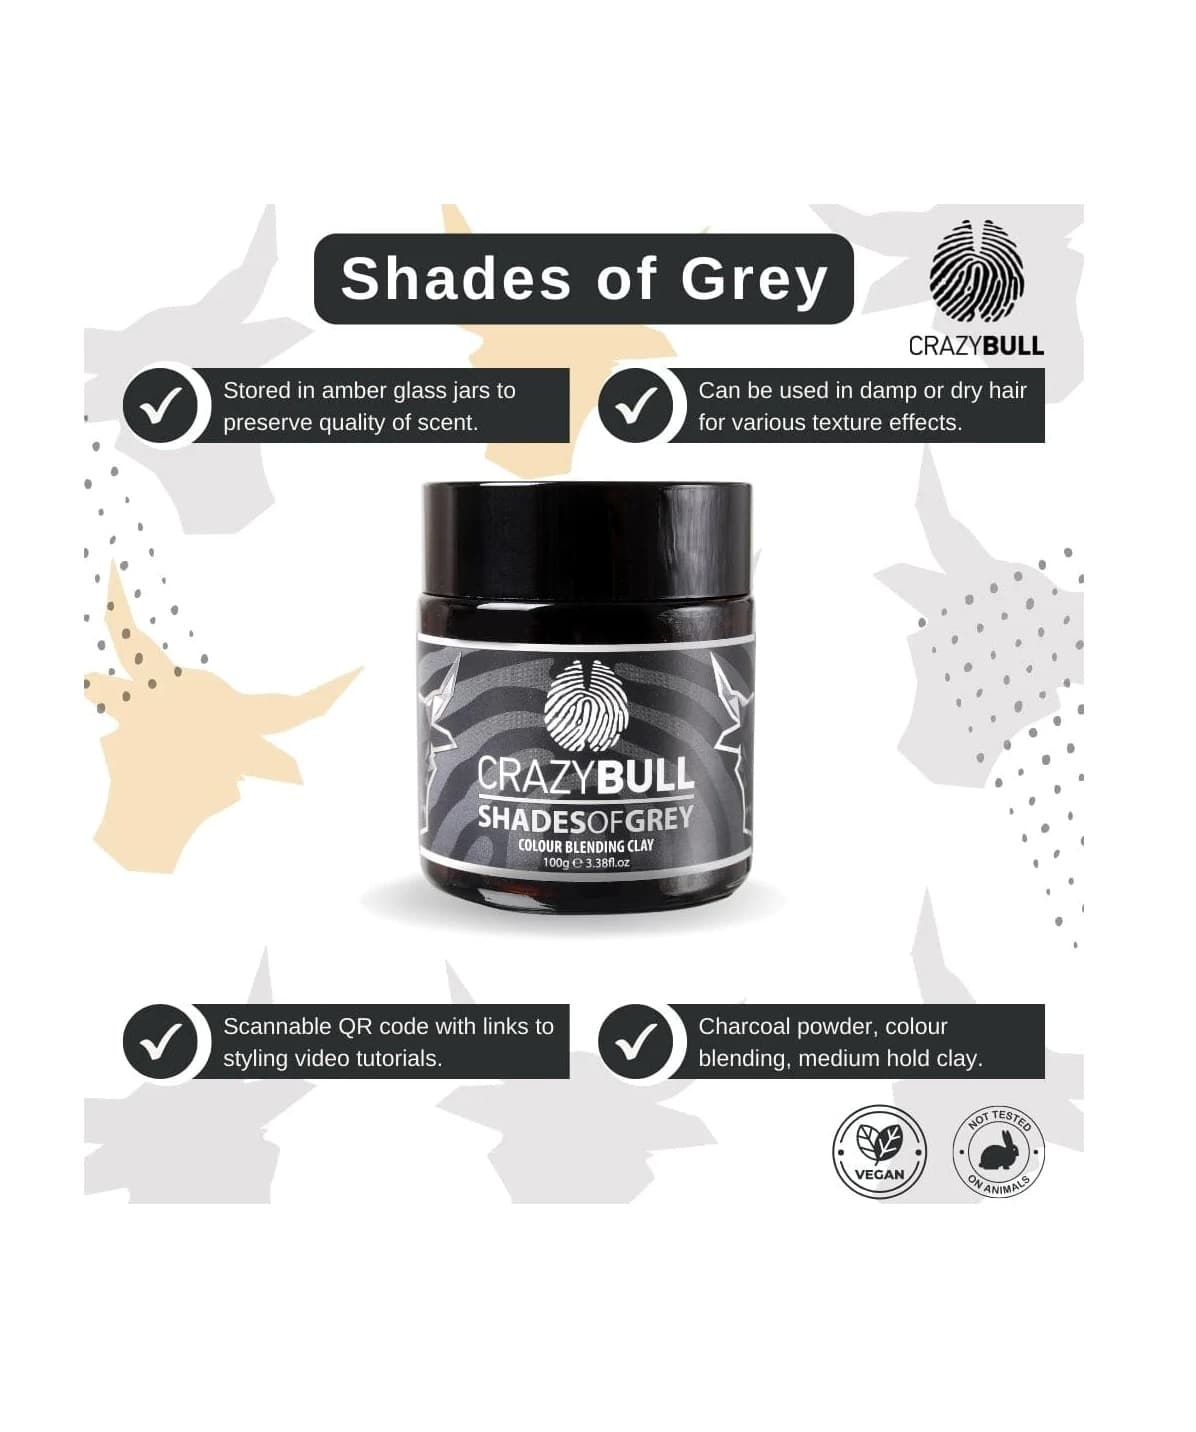 Crazy Bull Shades of Grey Colour Blending Clay 100g - Info